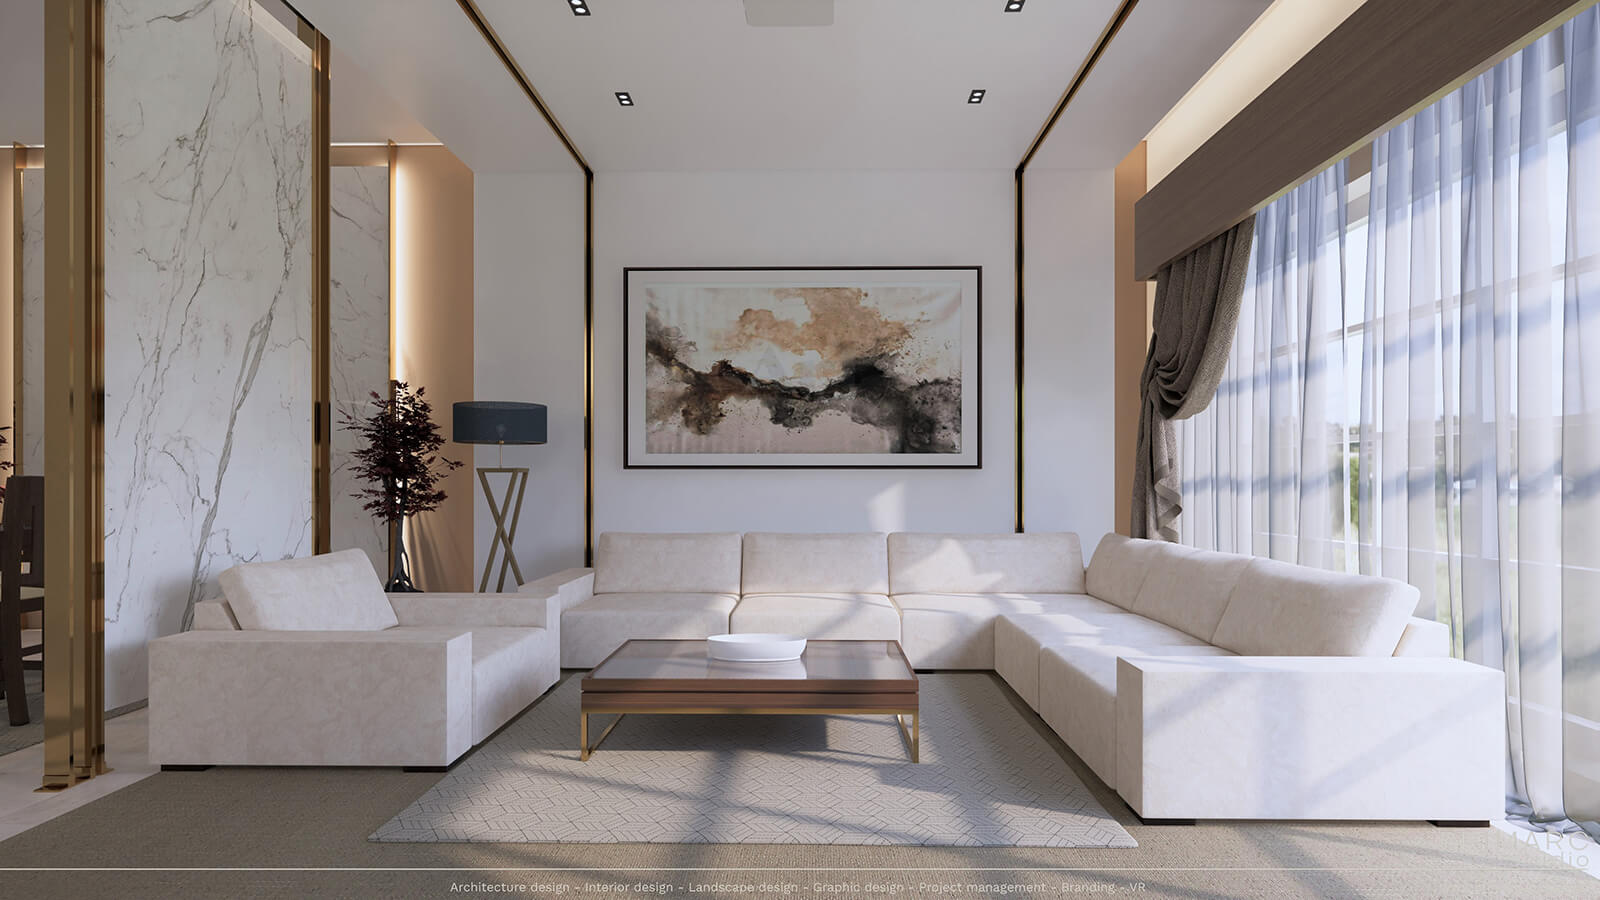 Interior design of lounge with painting on the back wall and curtains on the right side with free standing wall on the left side